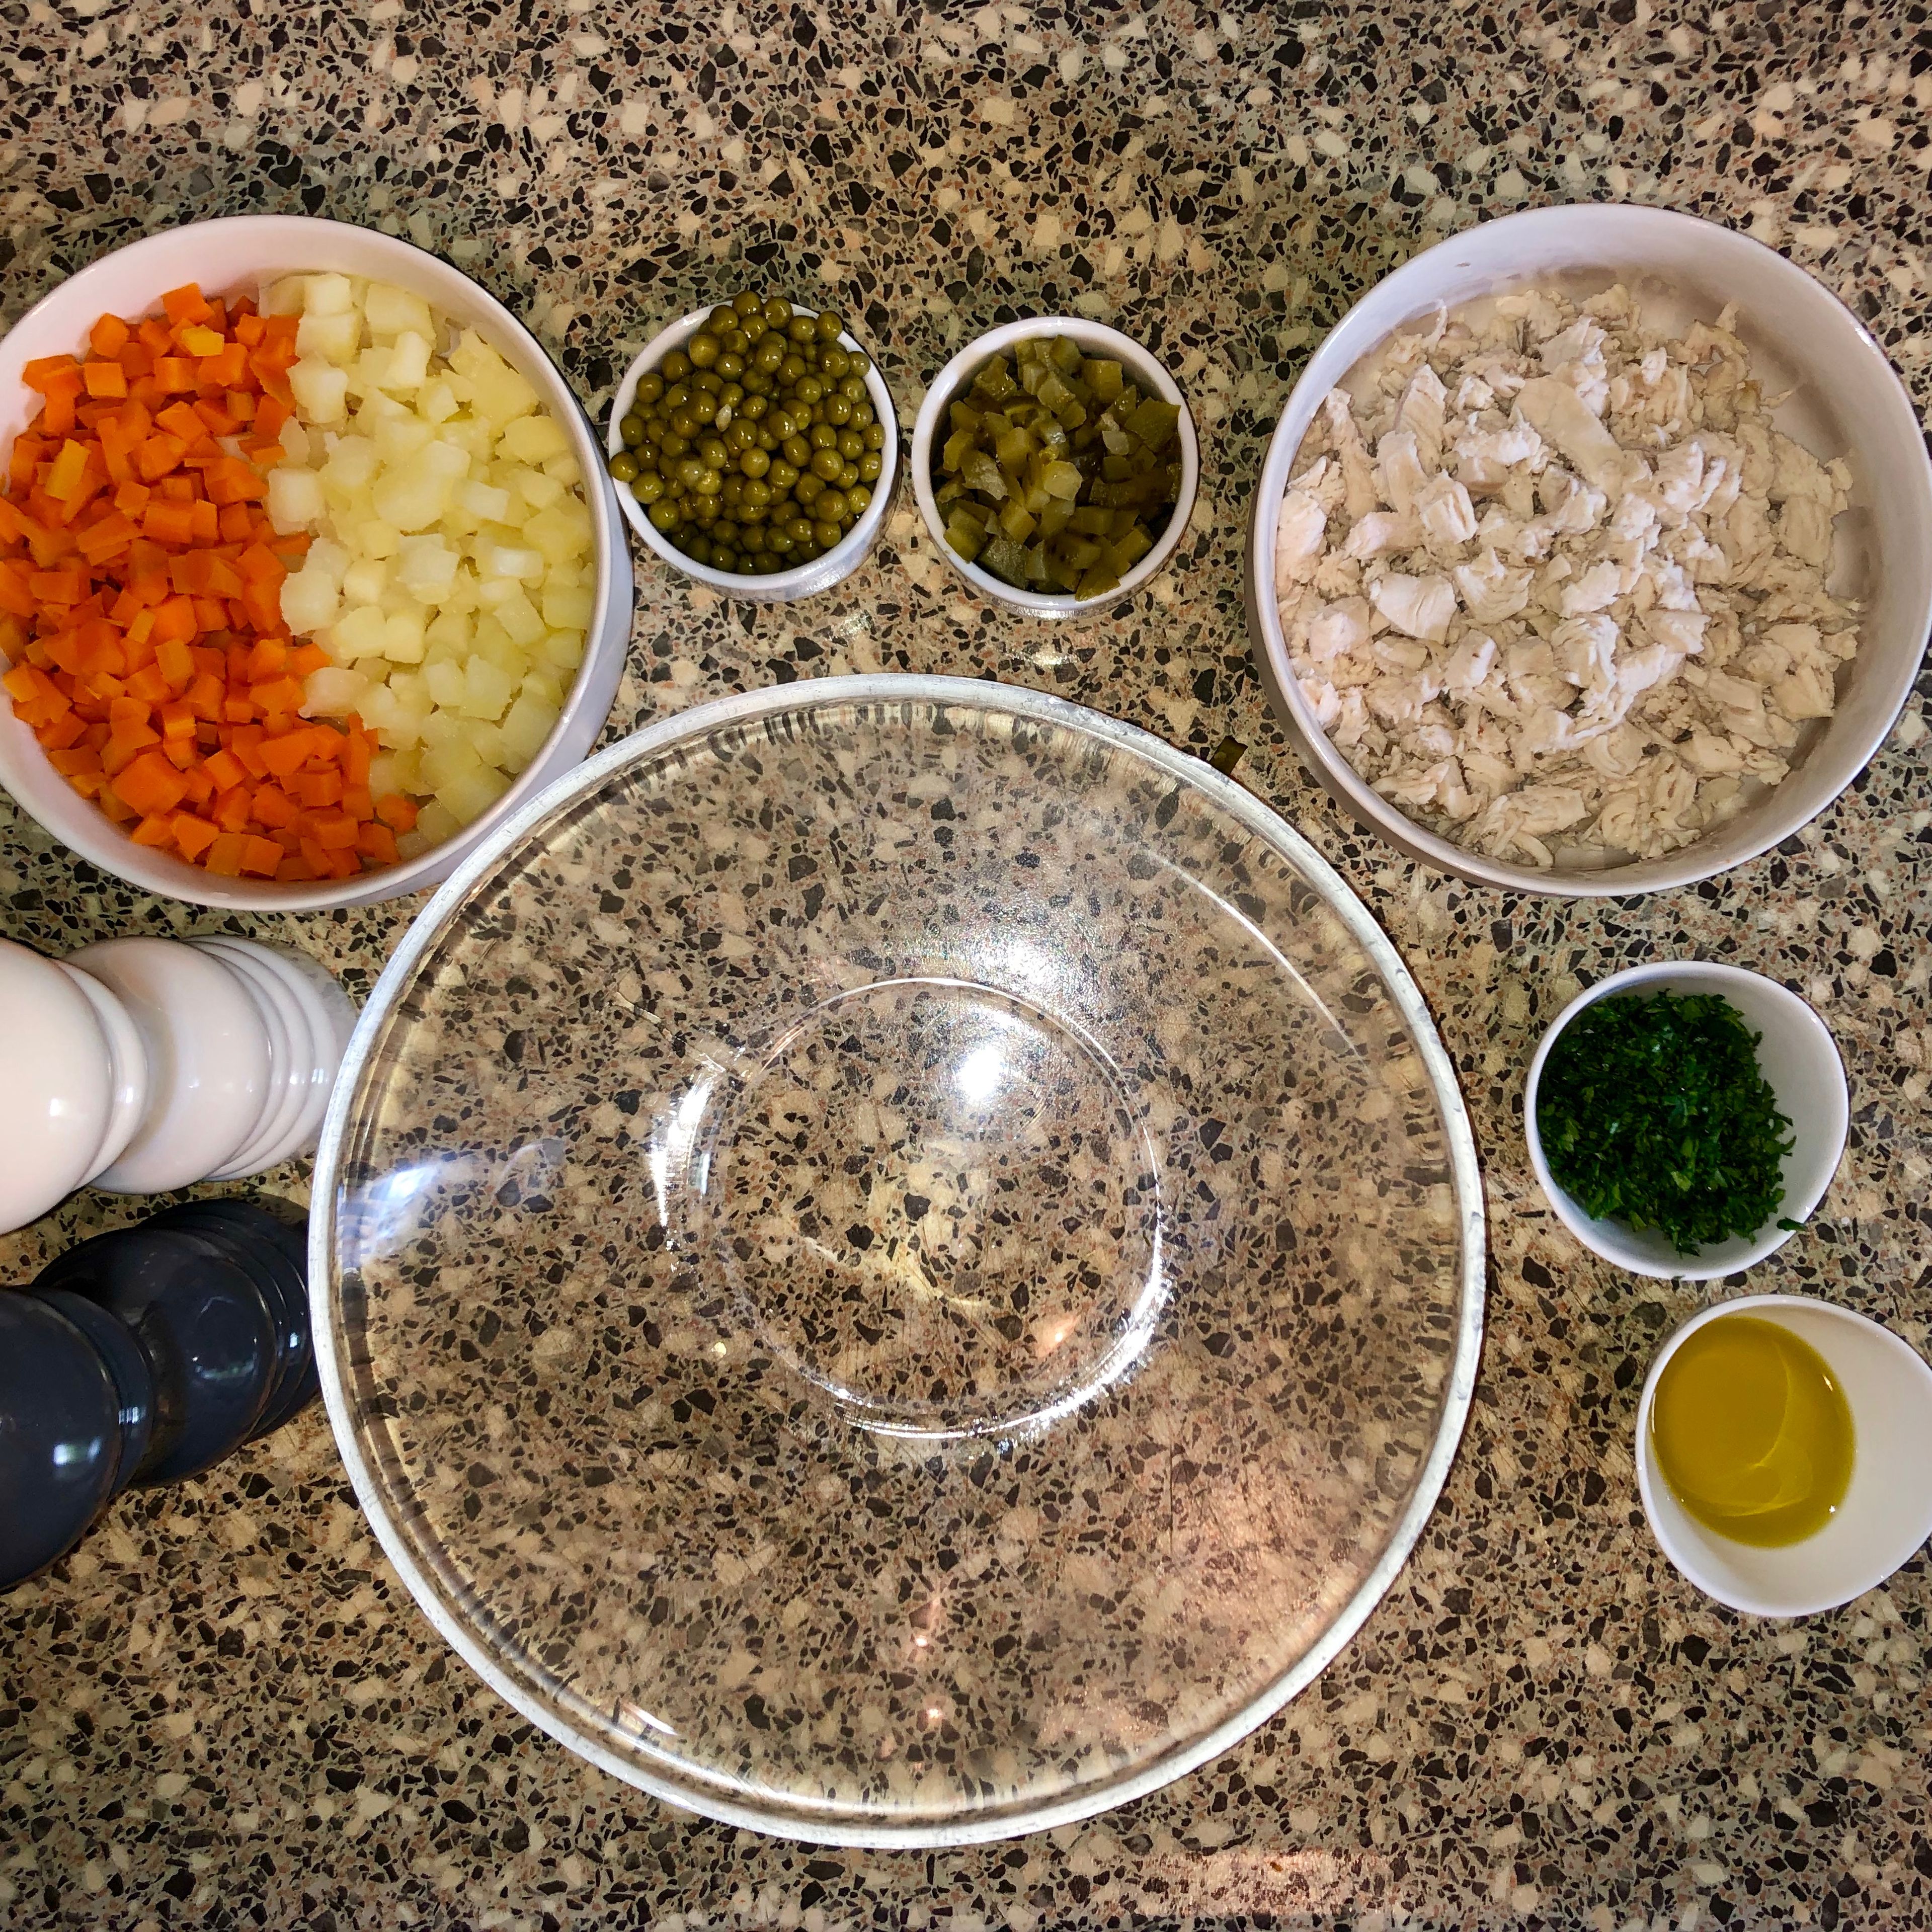 Combine all the ingredients in a mixing bowl and mix well. ( already cut chicken breast, carrots, potatoes, pickles, sweet peas, chopped parsley, olive oil, salt and pepper.